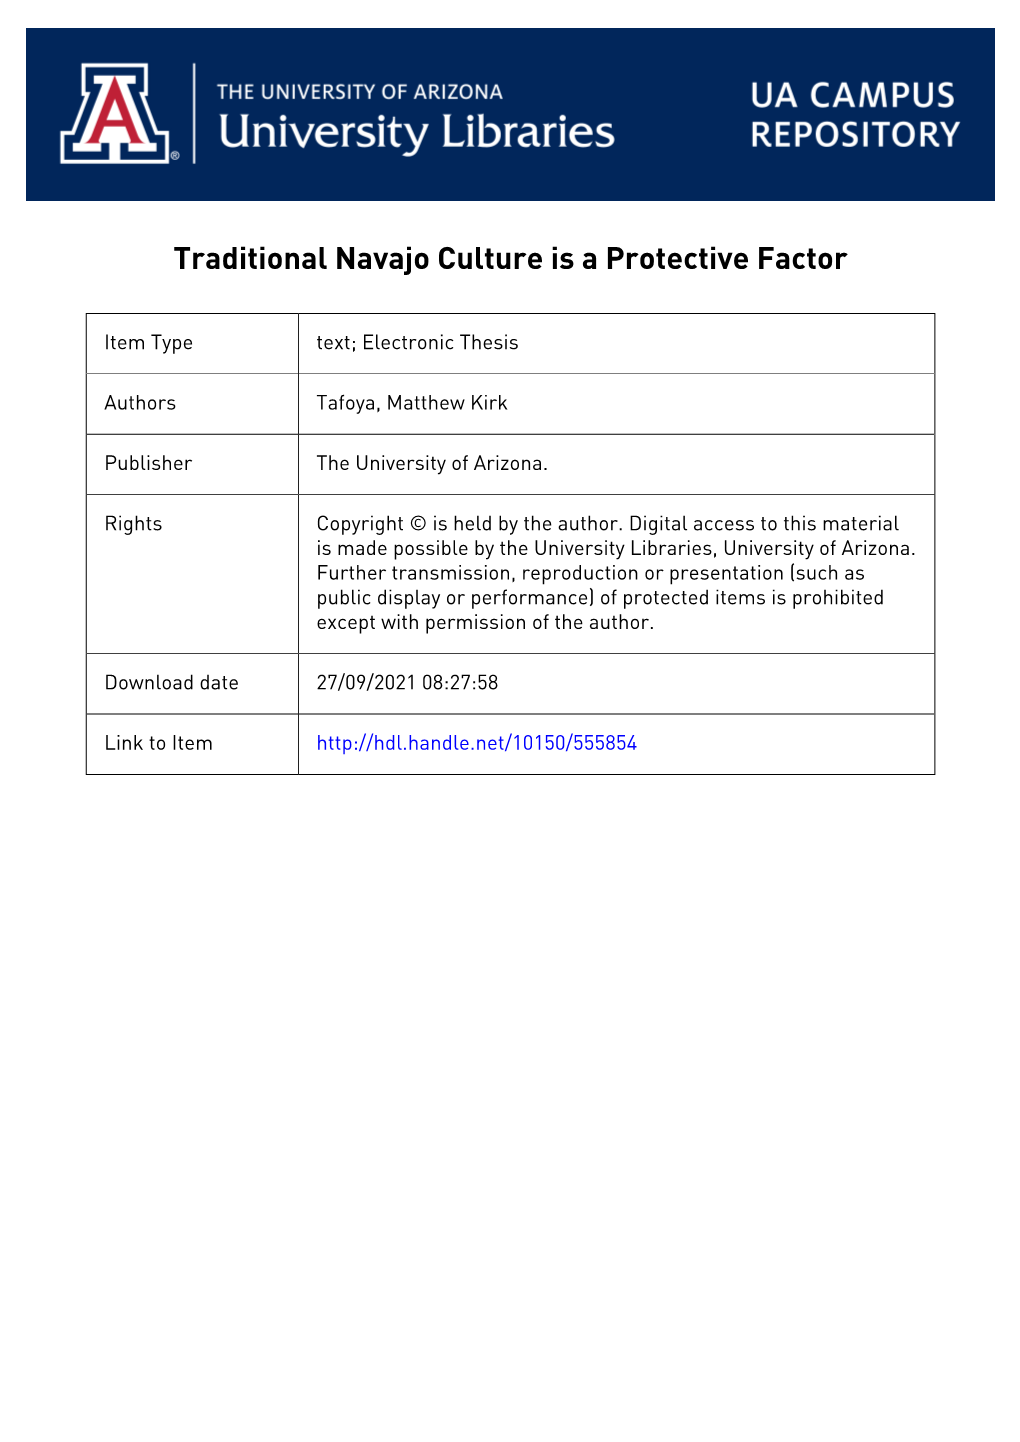 Traditional Navajo Culture Is a Protective Factor